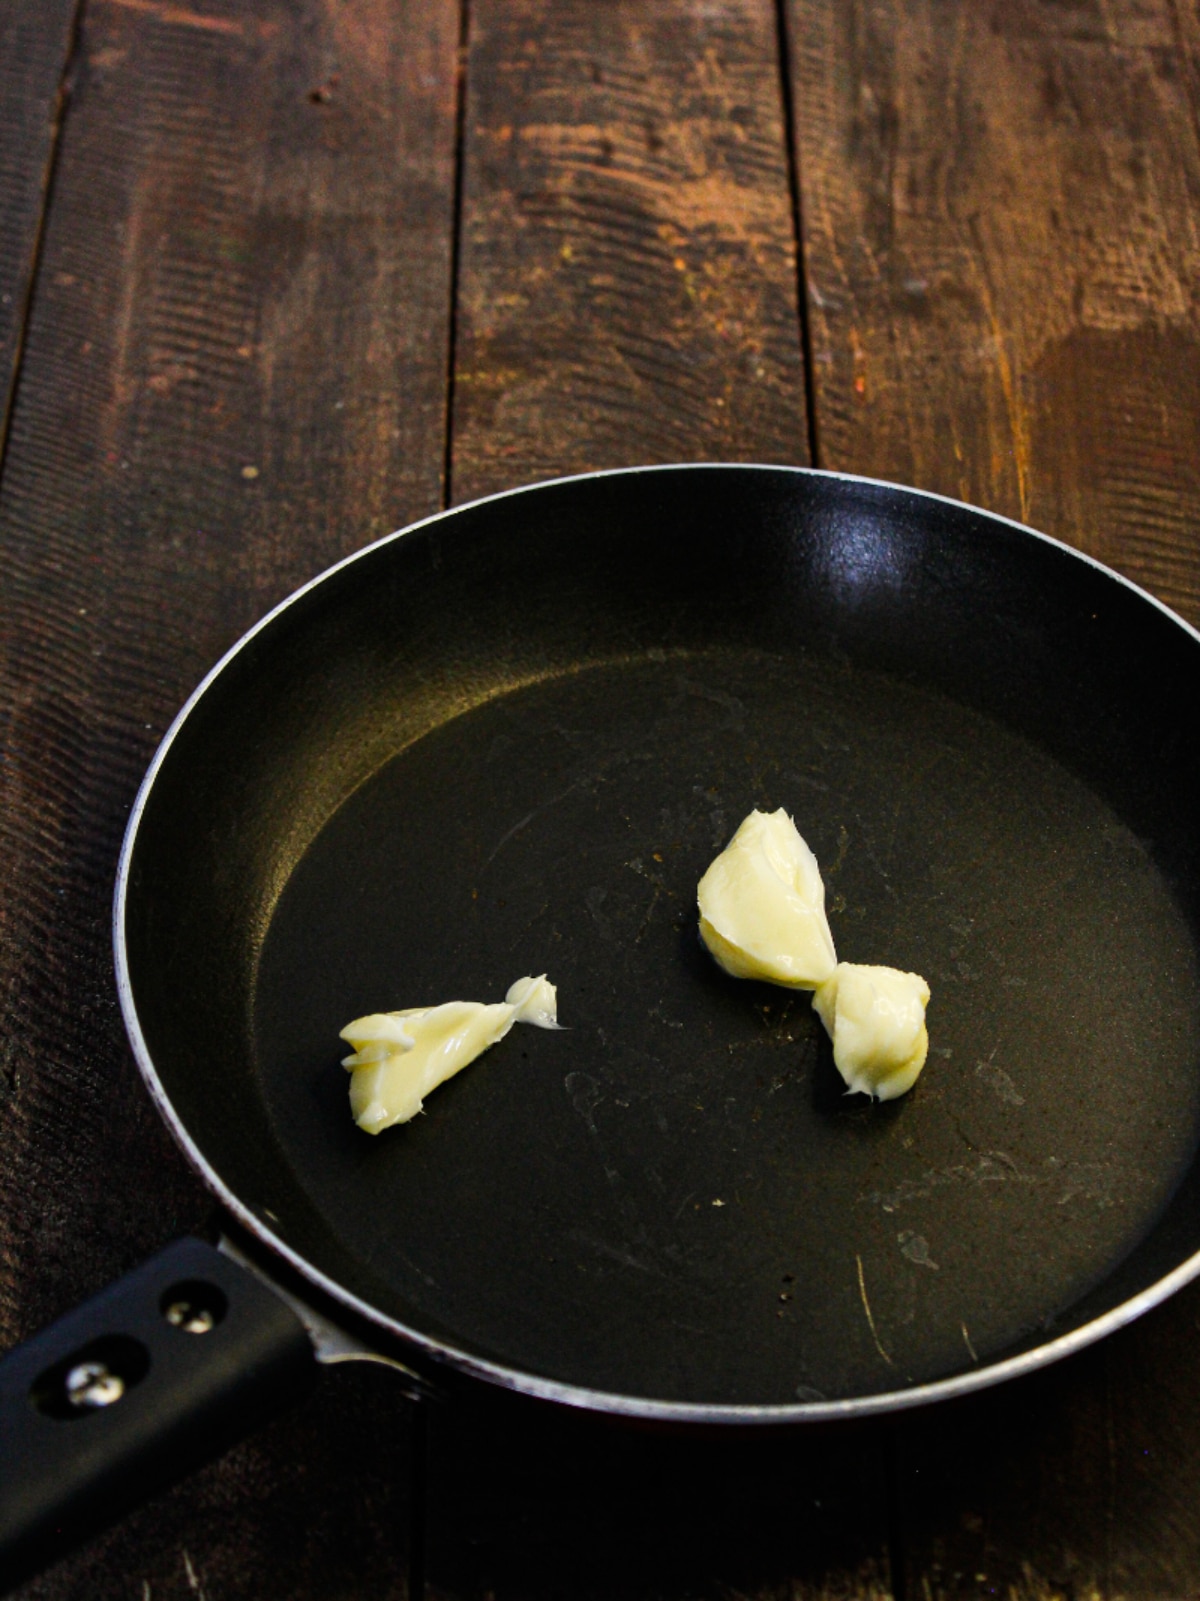 Take butter into the frying pan